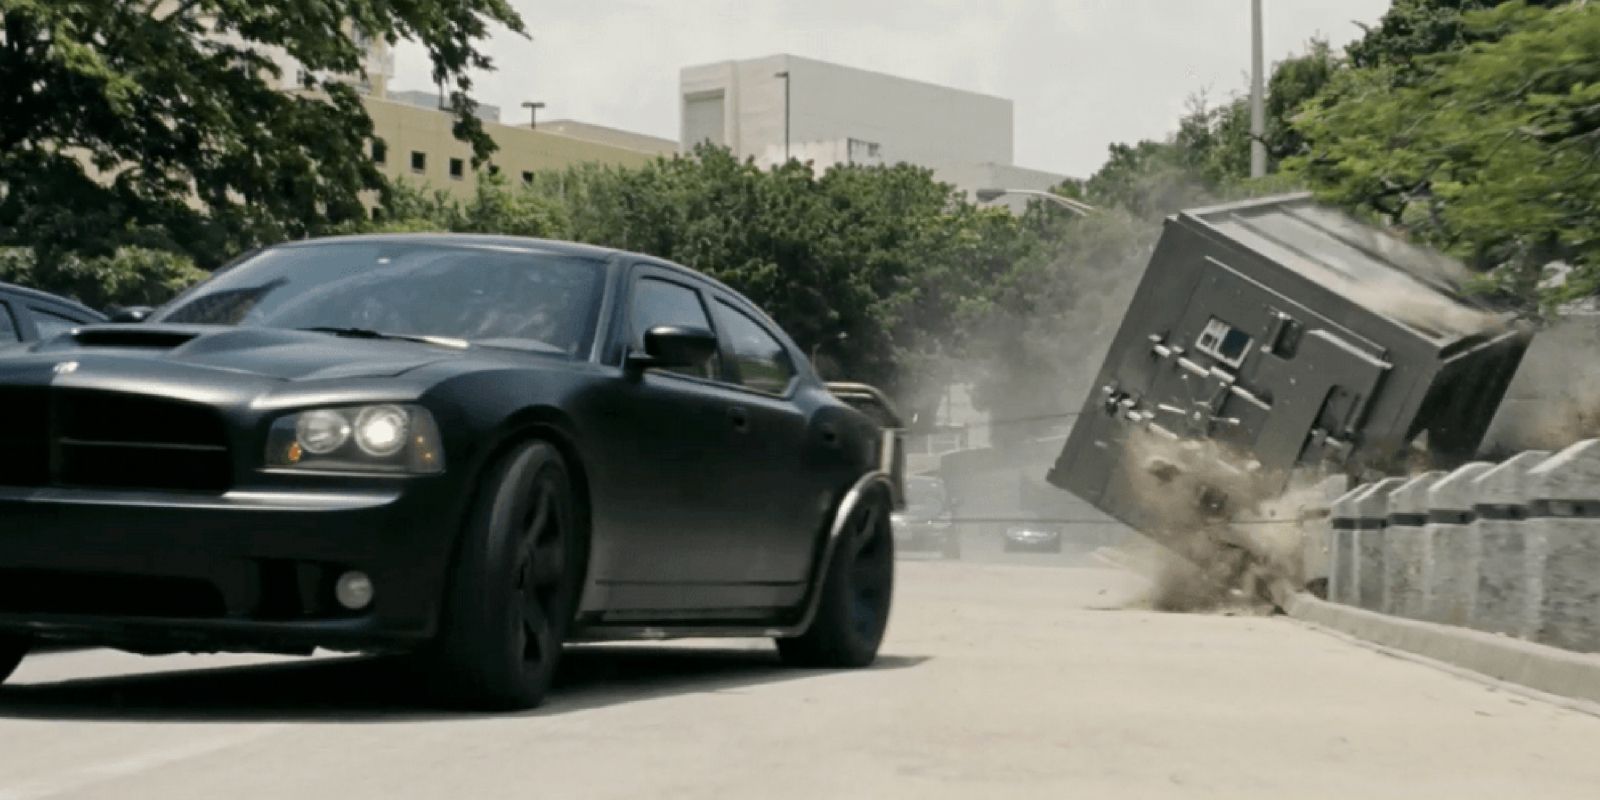 A car drags a vault through the streets in Fast Five